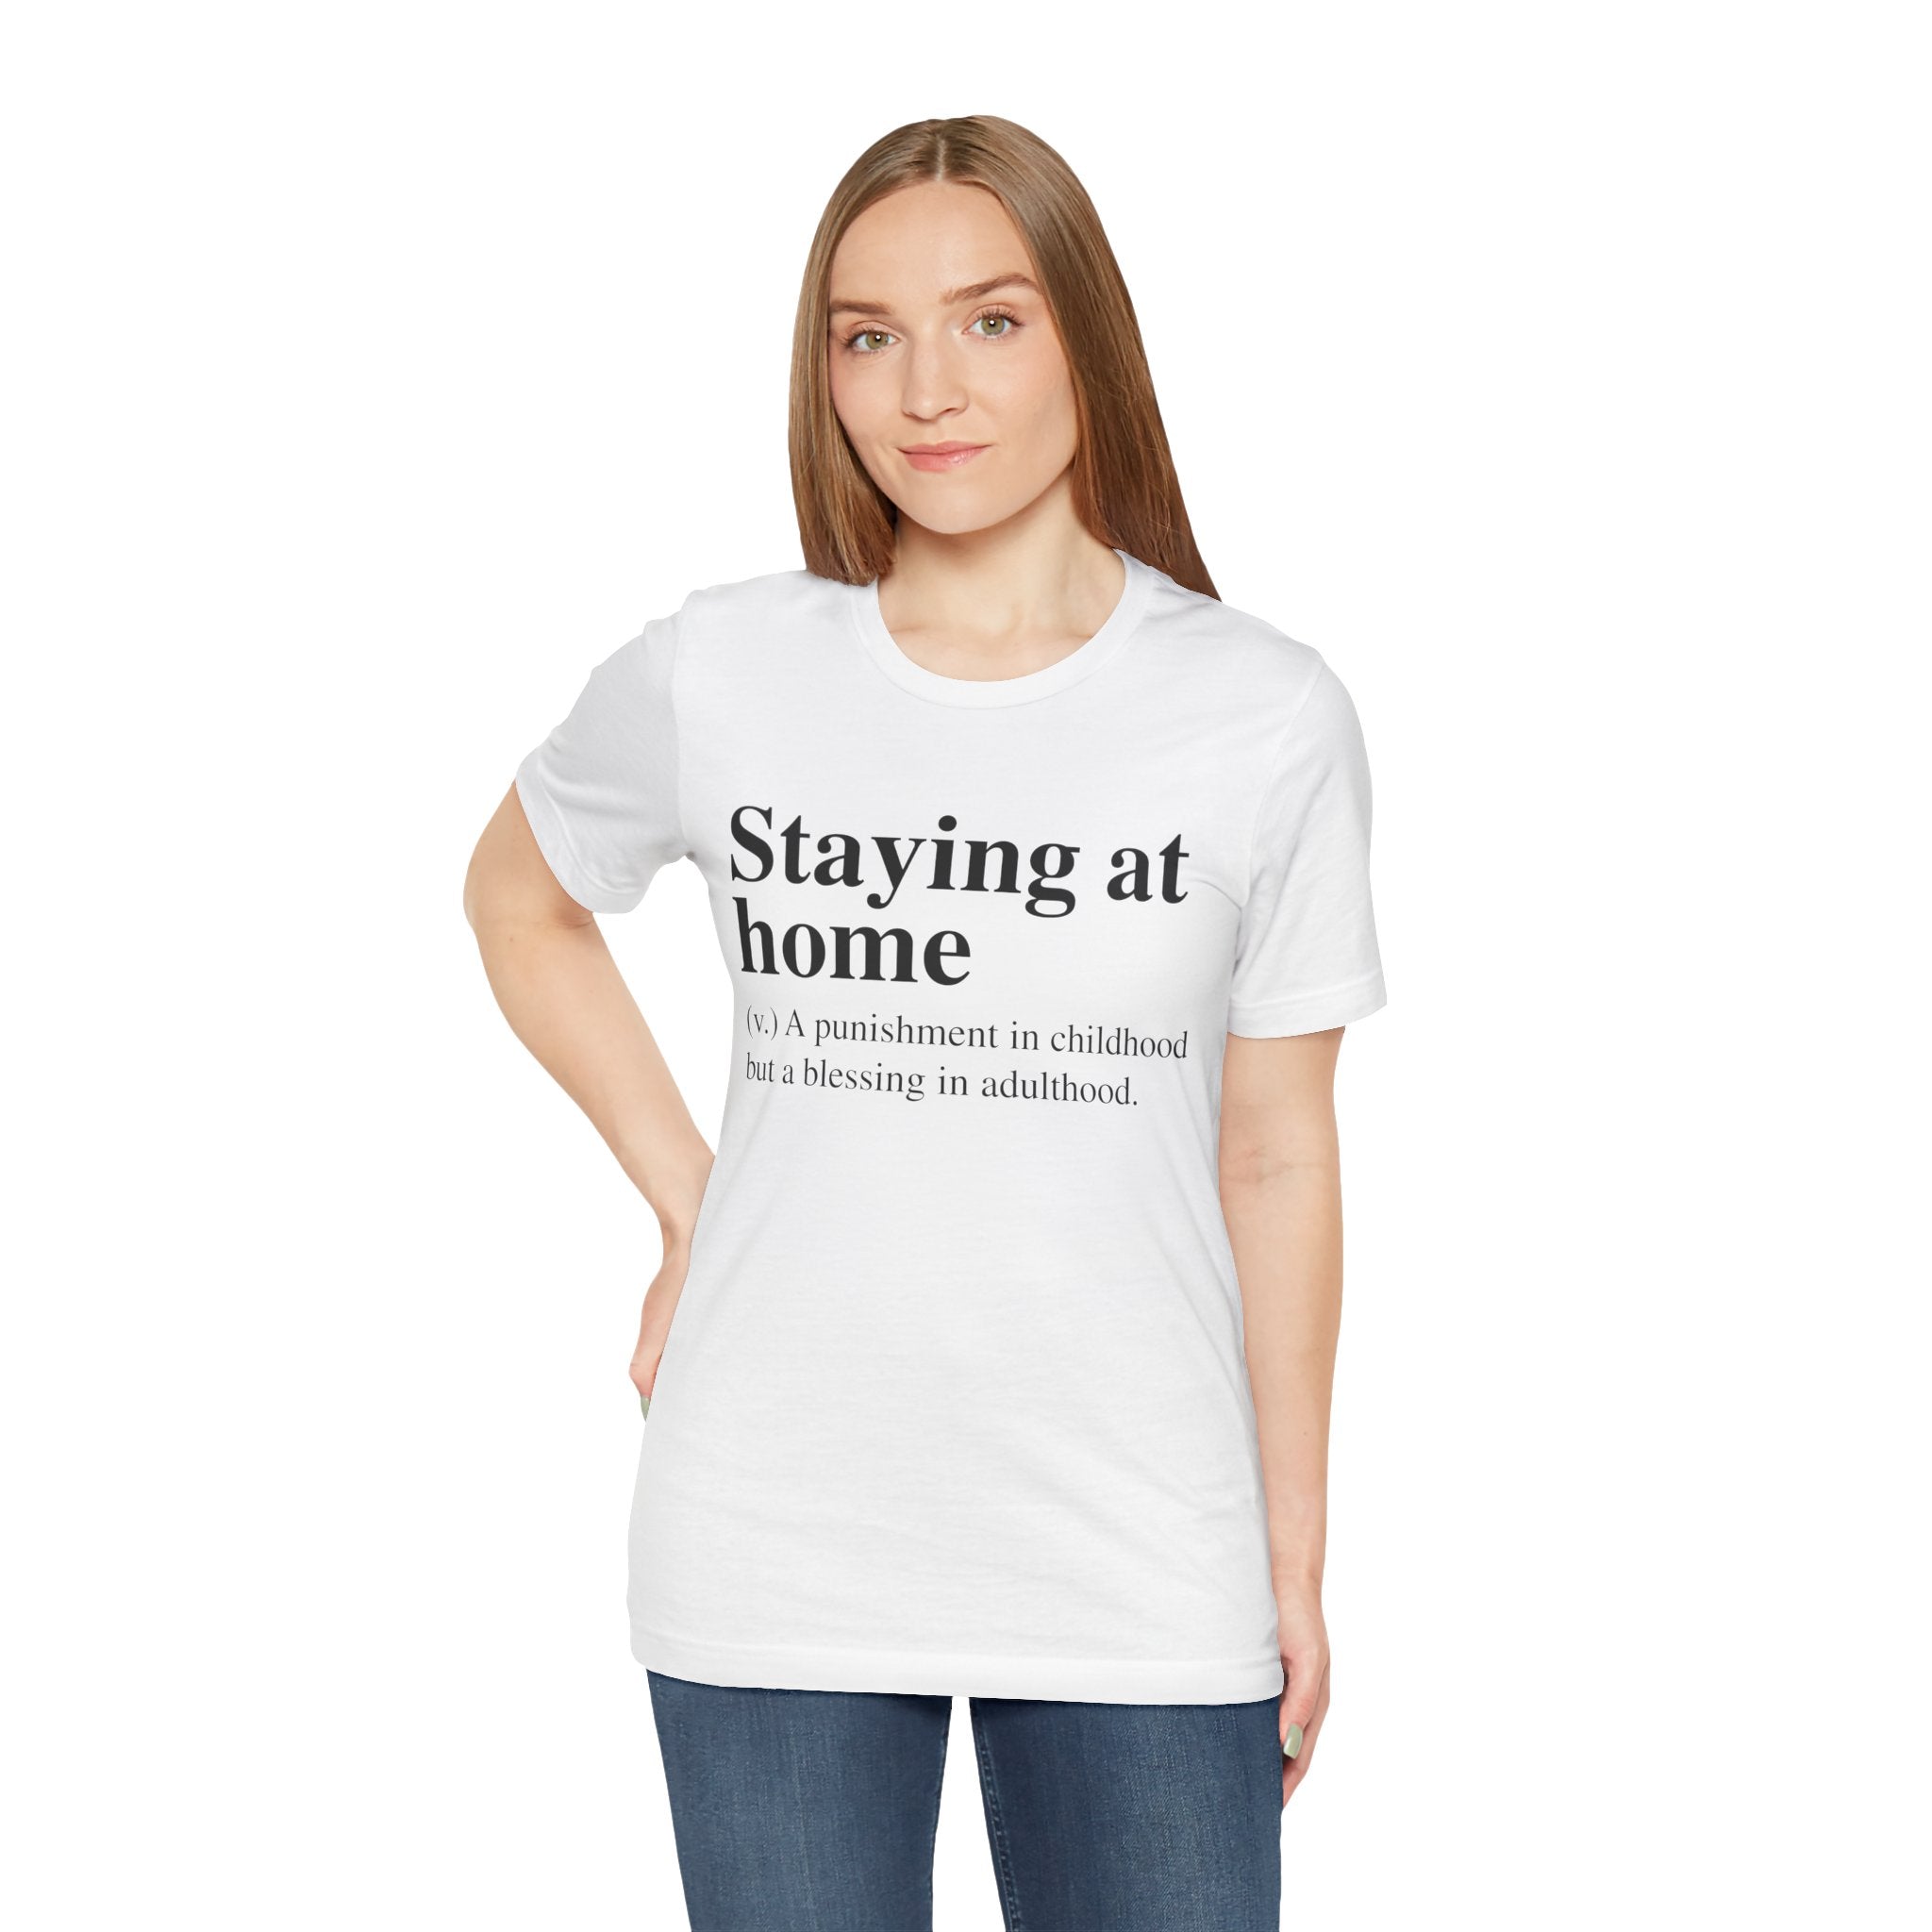 Woman in a comfortable fit Staying at Home T-shirt with the text "staying at home - a punishment in childhood but a blessing in adulthood.